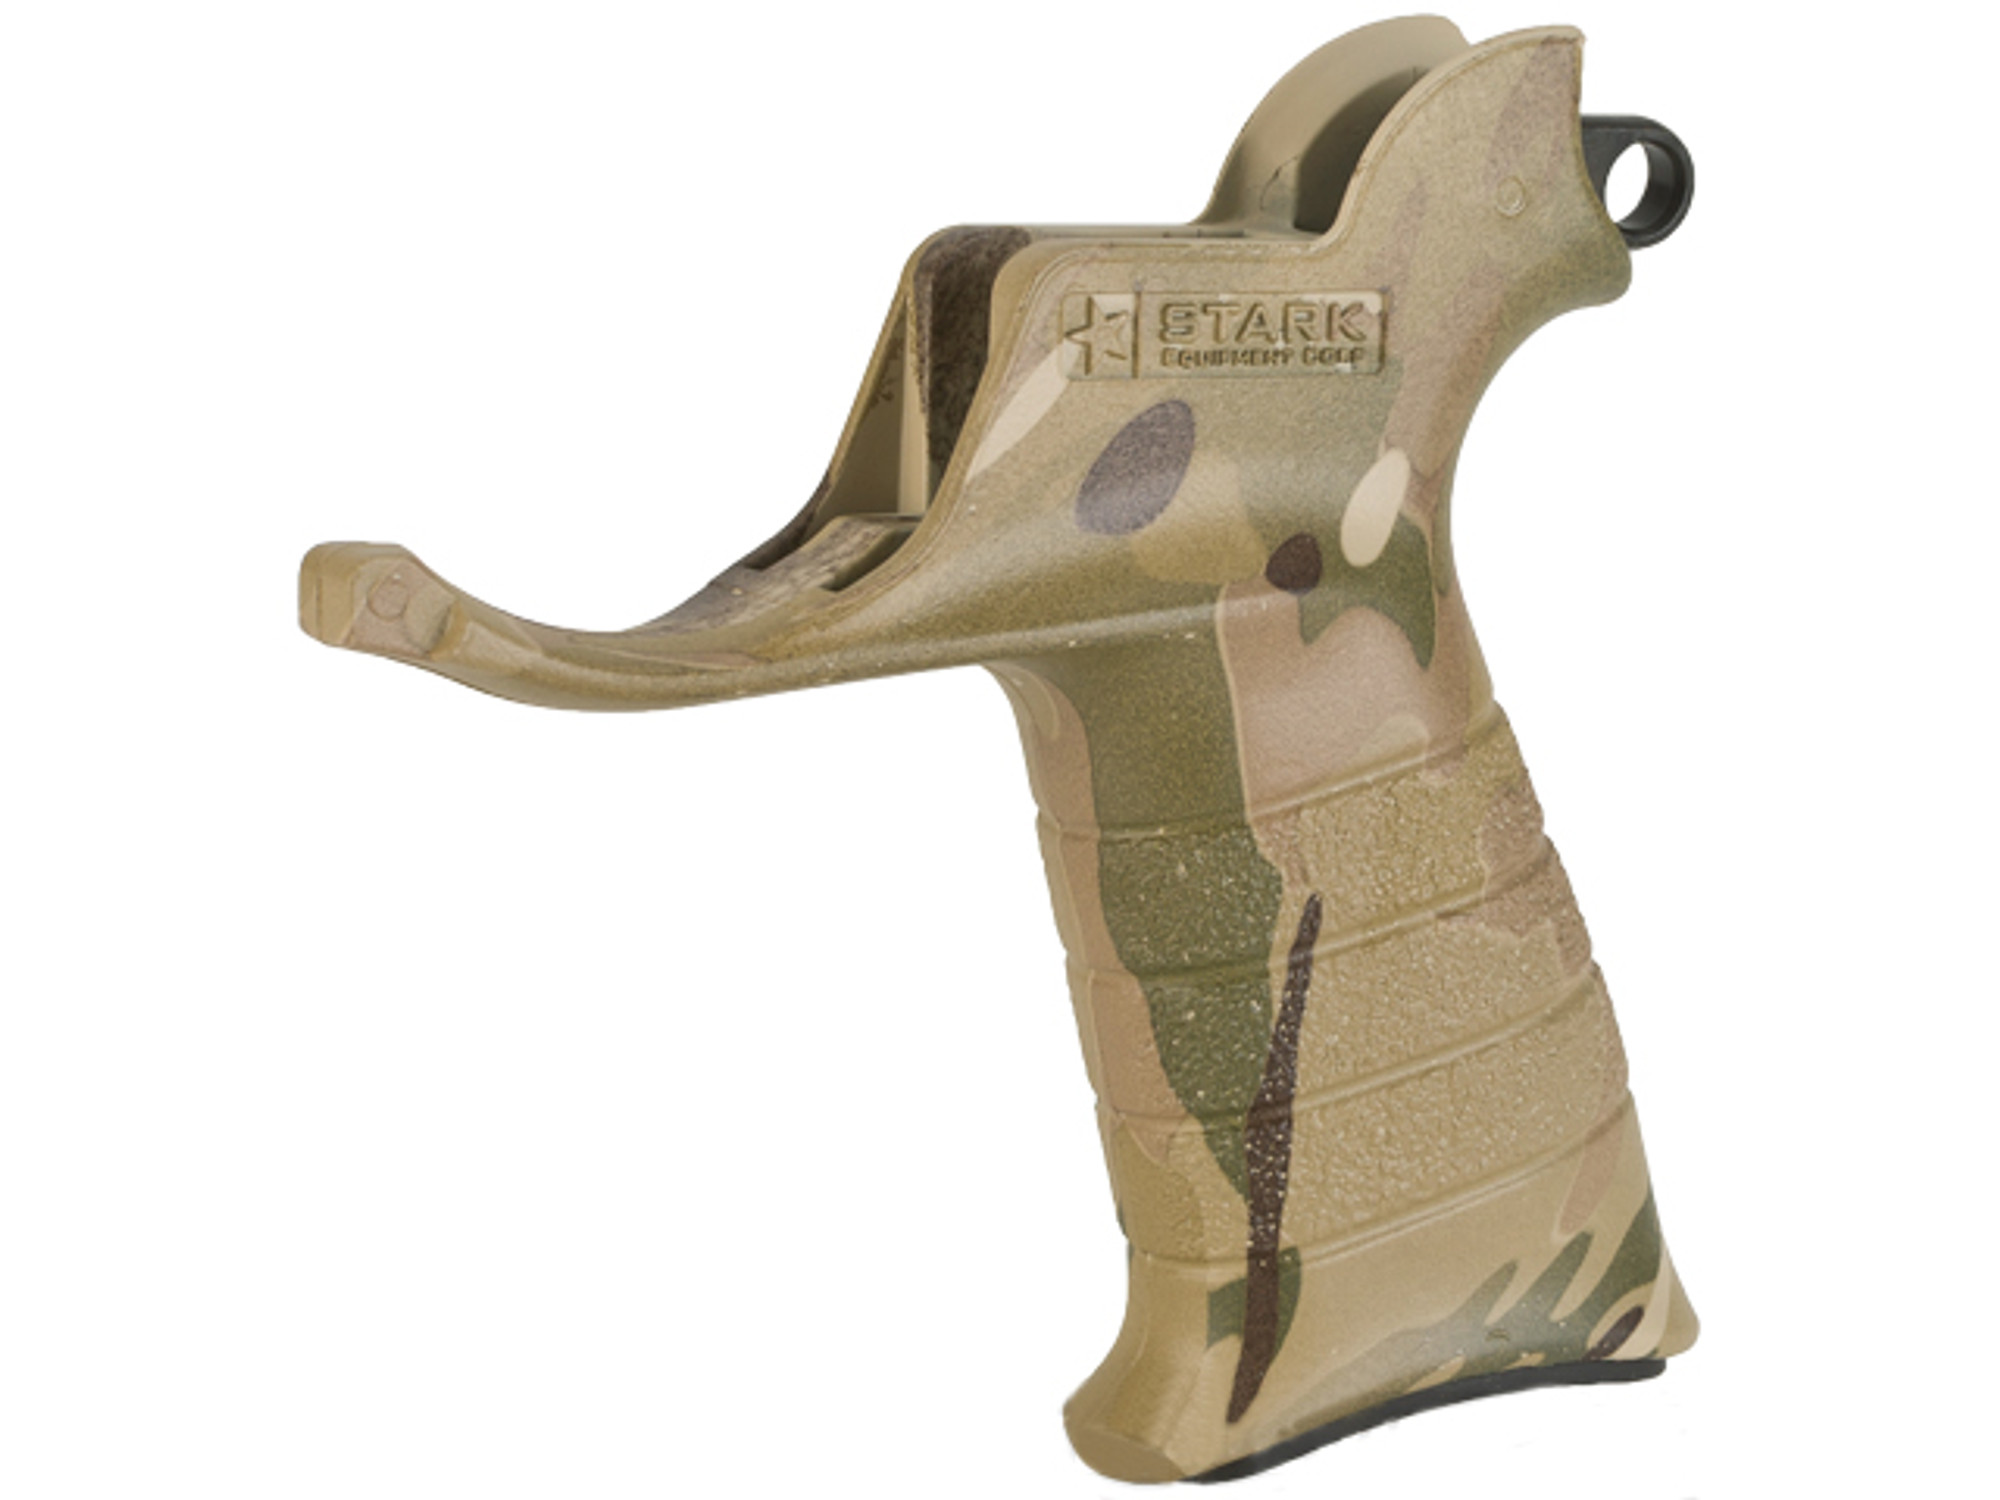 Stark Equipment AR SE2 Grip for M4 / M16 Series Airsoft GBB and Real Steel AR15 Rifles - Sling Hook / Multicam